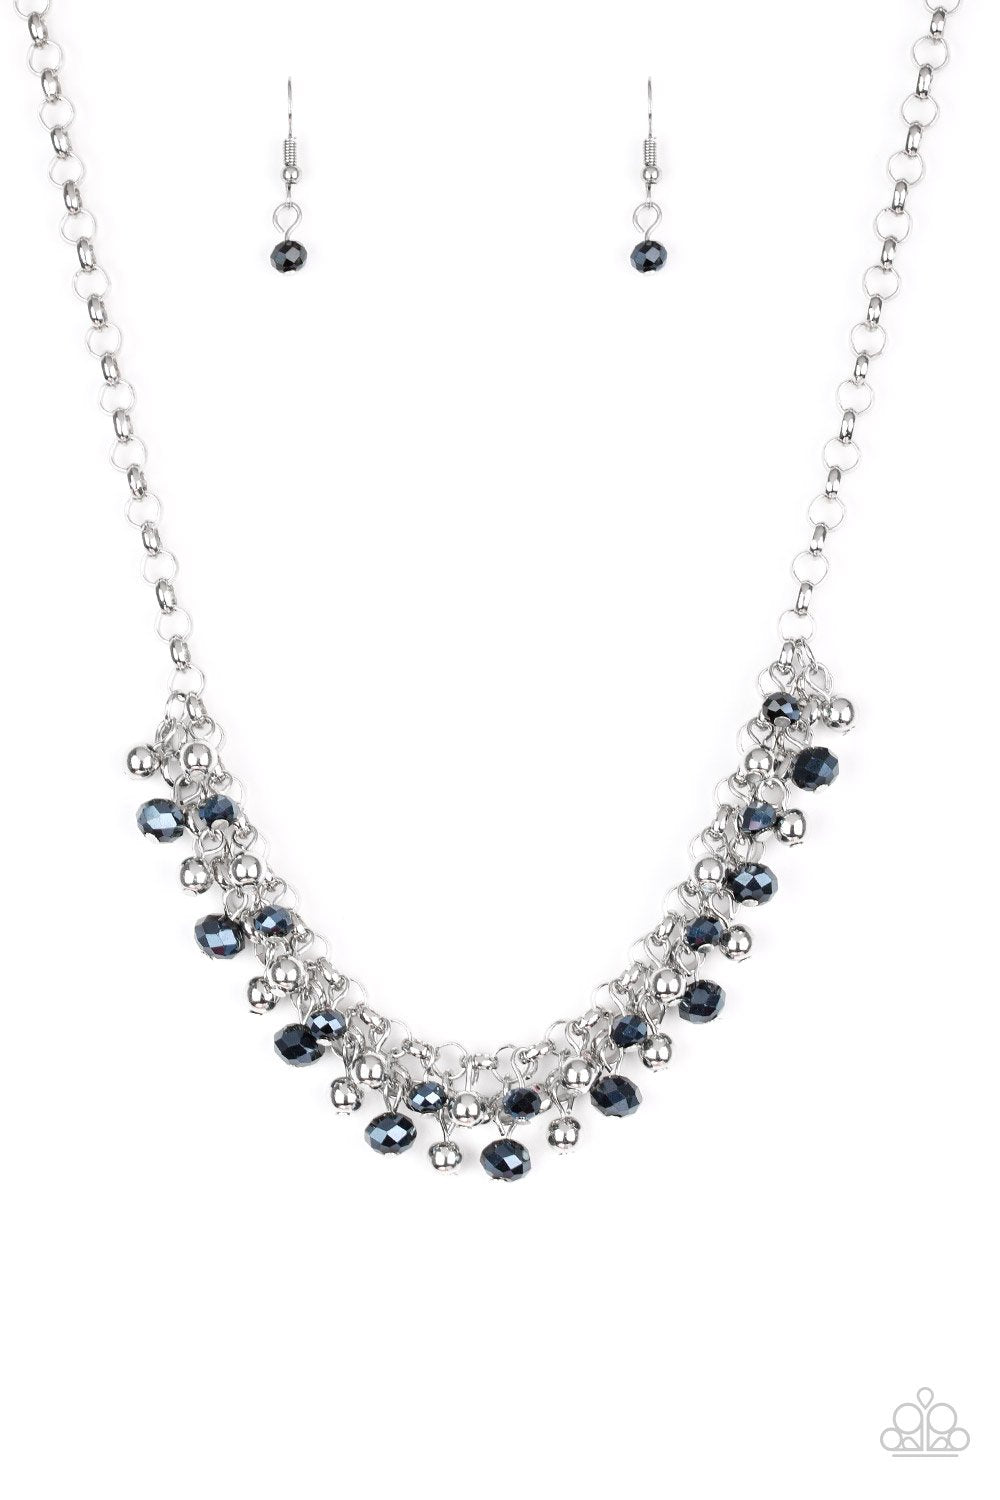 Trust Fund Baby Silver and Metallic Blue Necklace - Paparazzi Accessories-CarasShop.com - $5 Jewelry by Cara Jewels